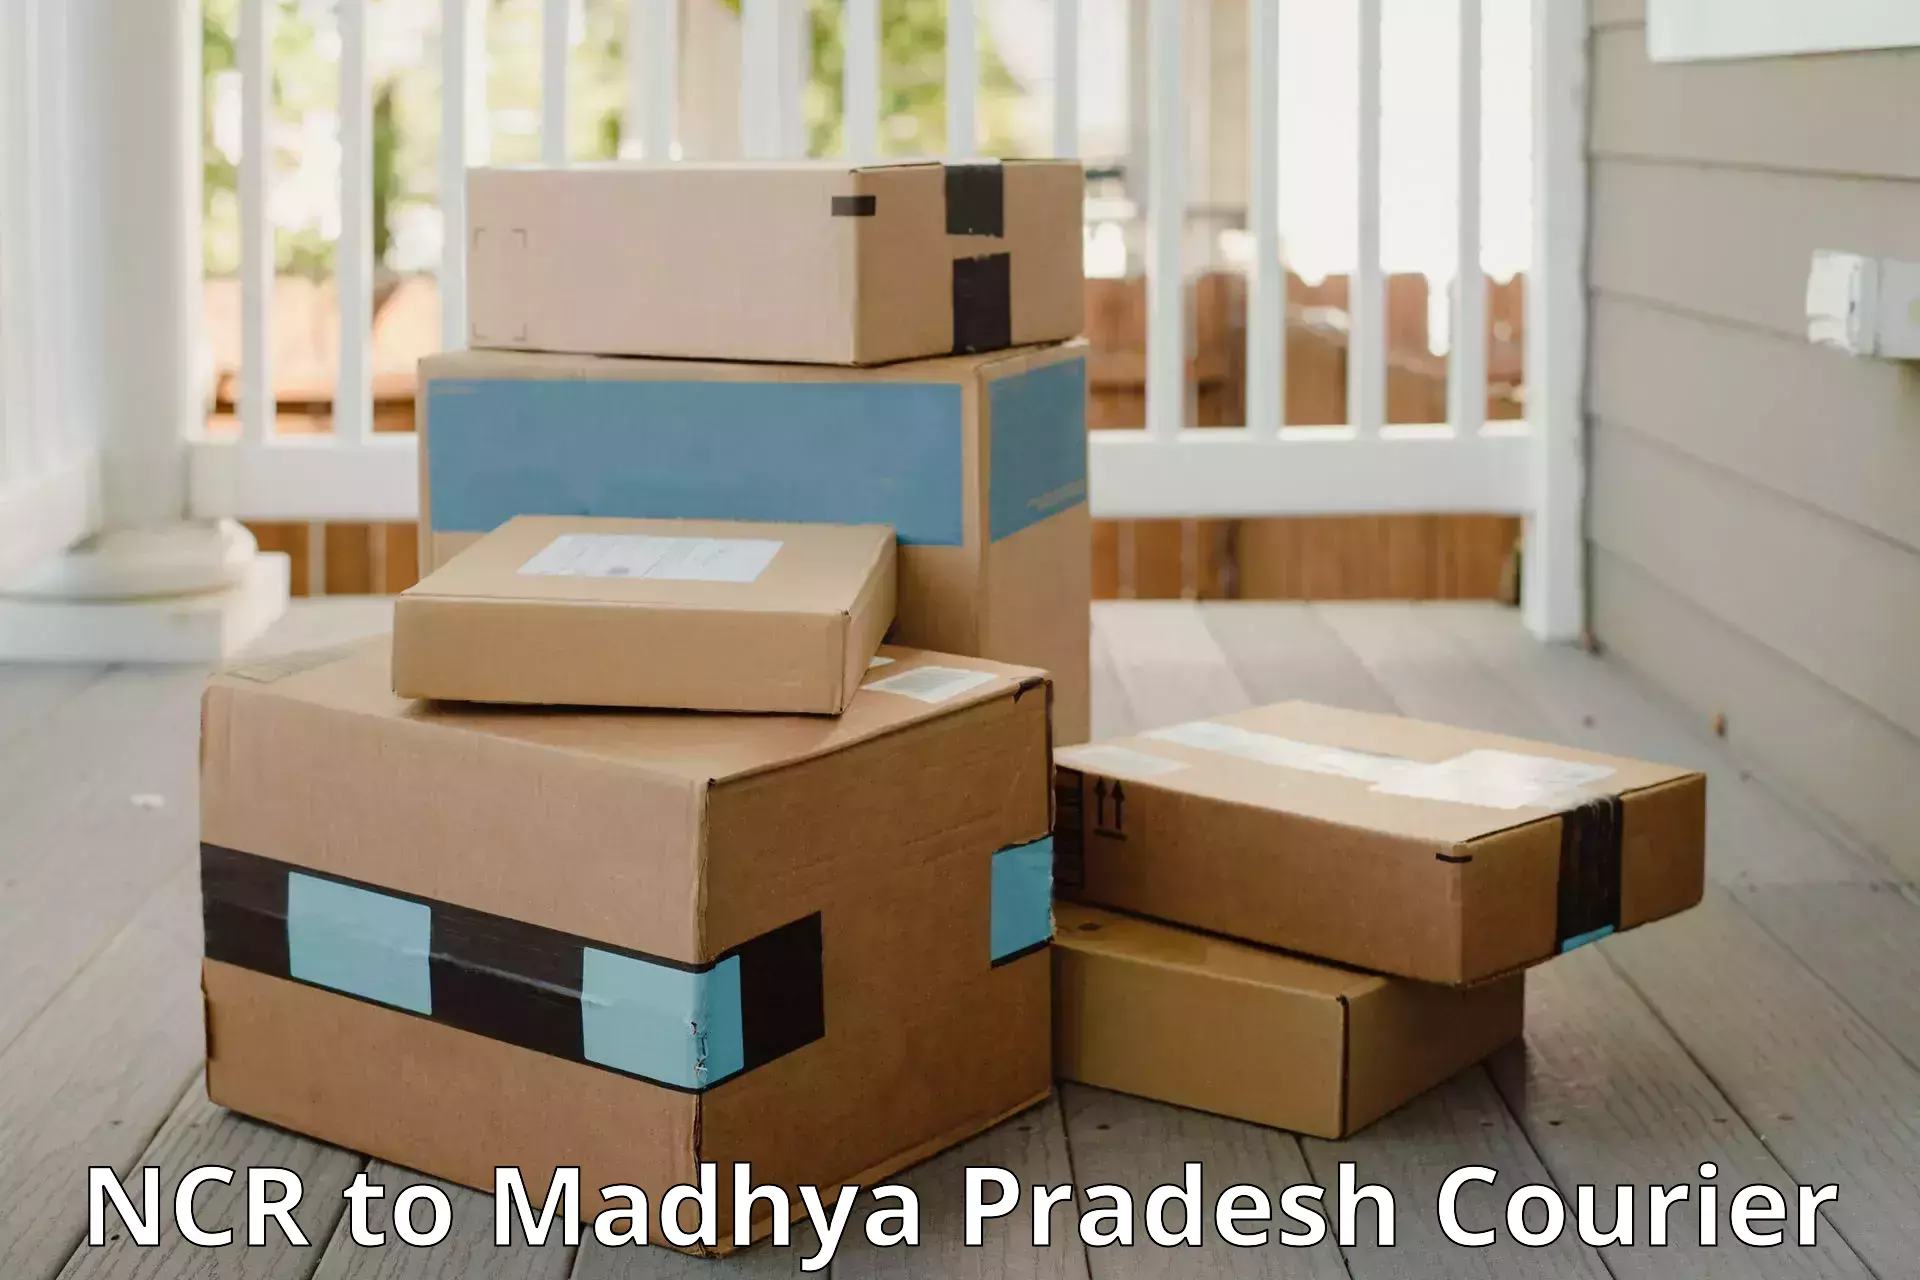 Personal effects shipping in NCR to Madhya Pradesh